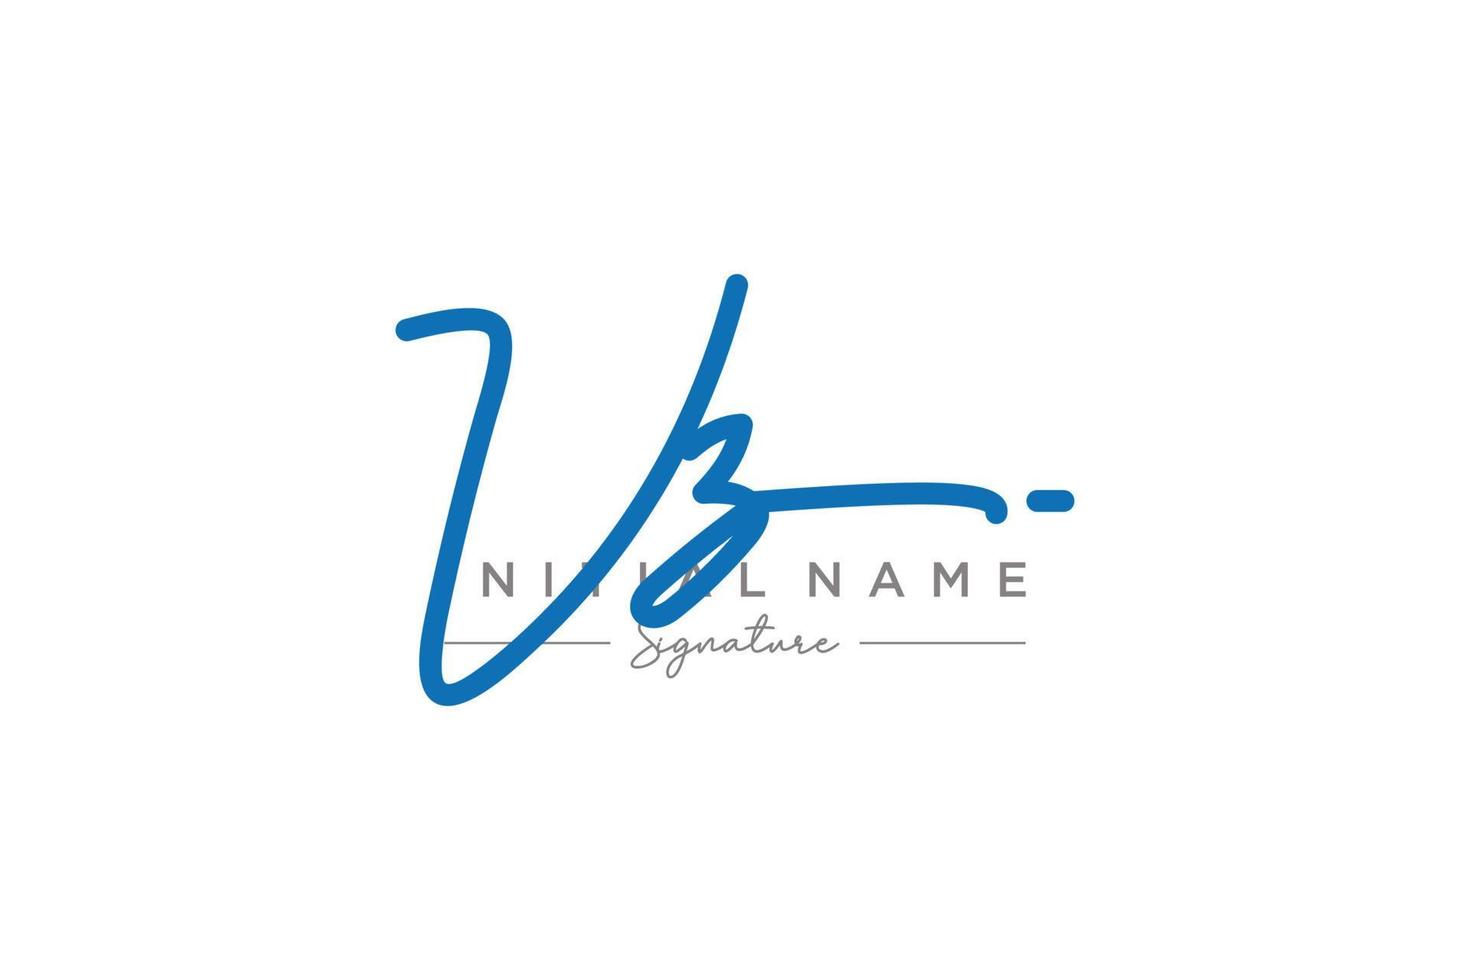 Initial VZ signature logo template vector. Hand drawn Calligraphy lettering Vector illustration.